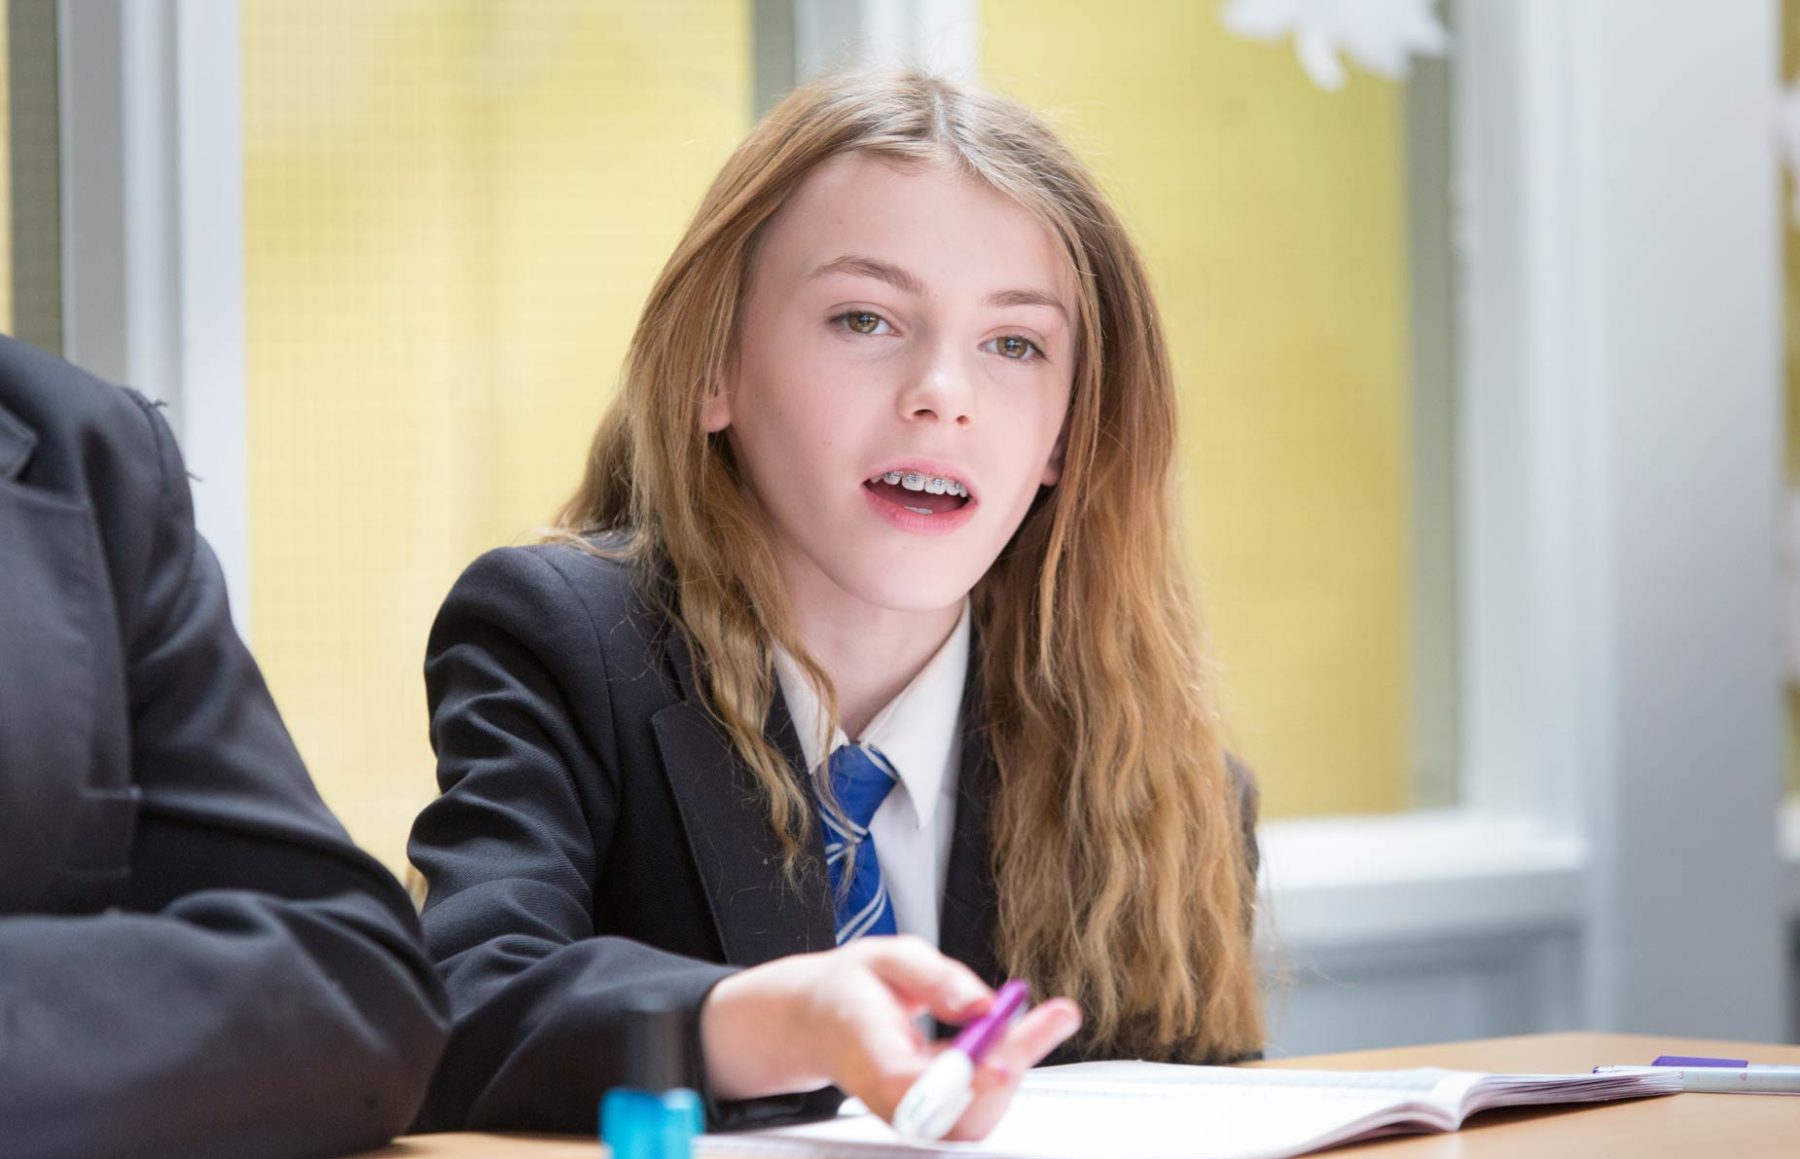 Girl in school blazer and tie studying in class sitting at desk with pen in hand